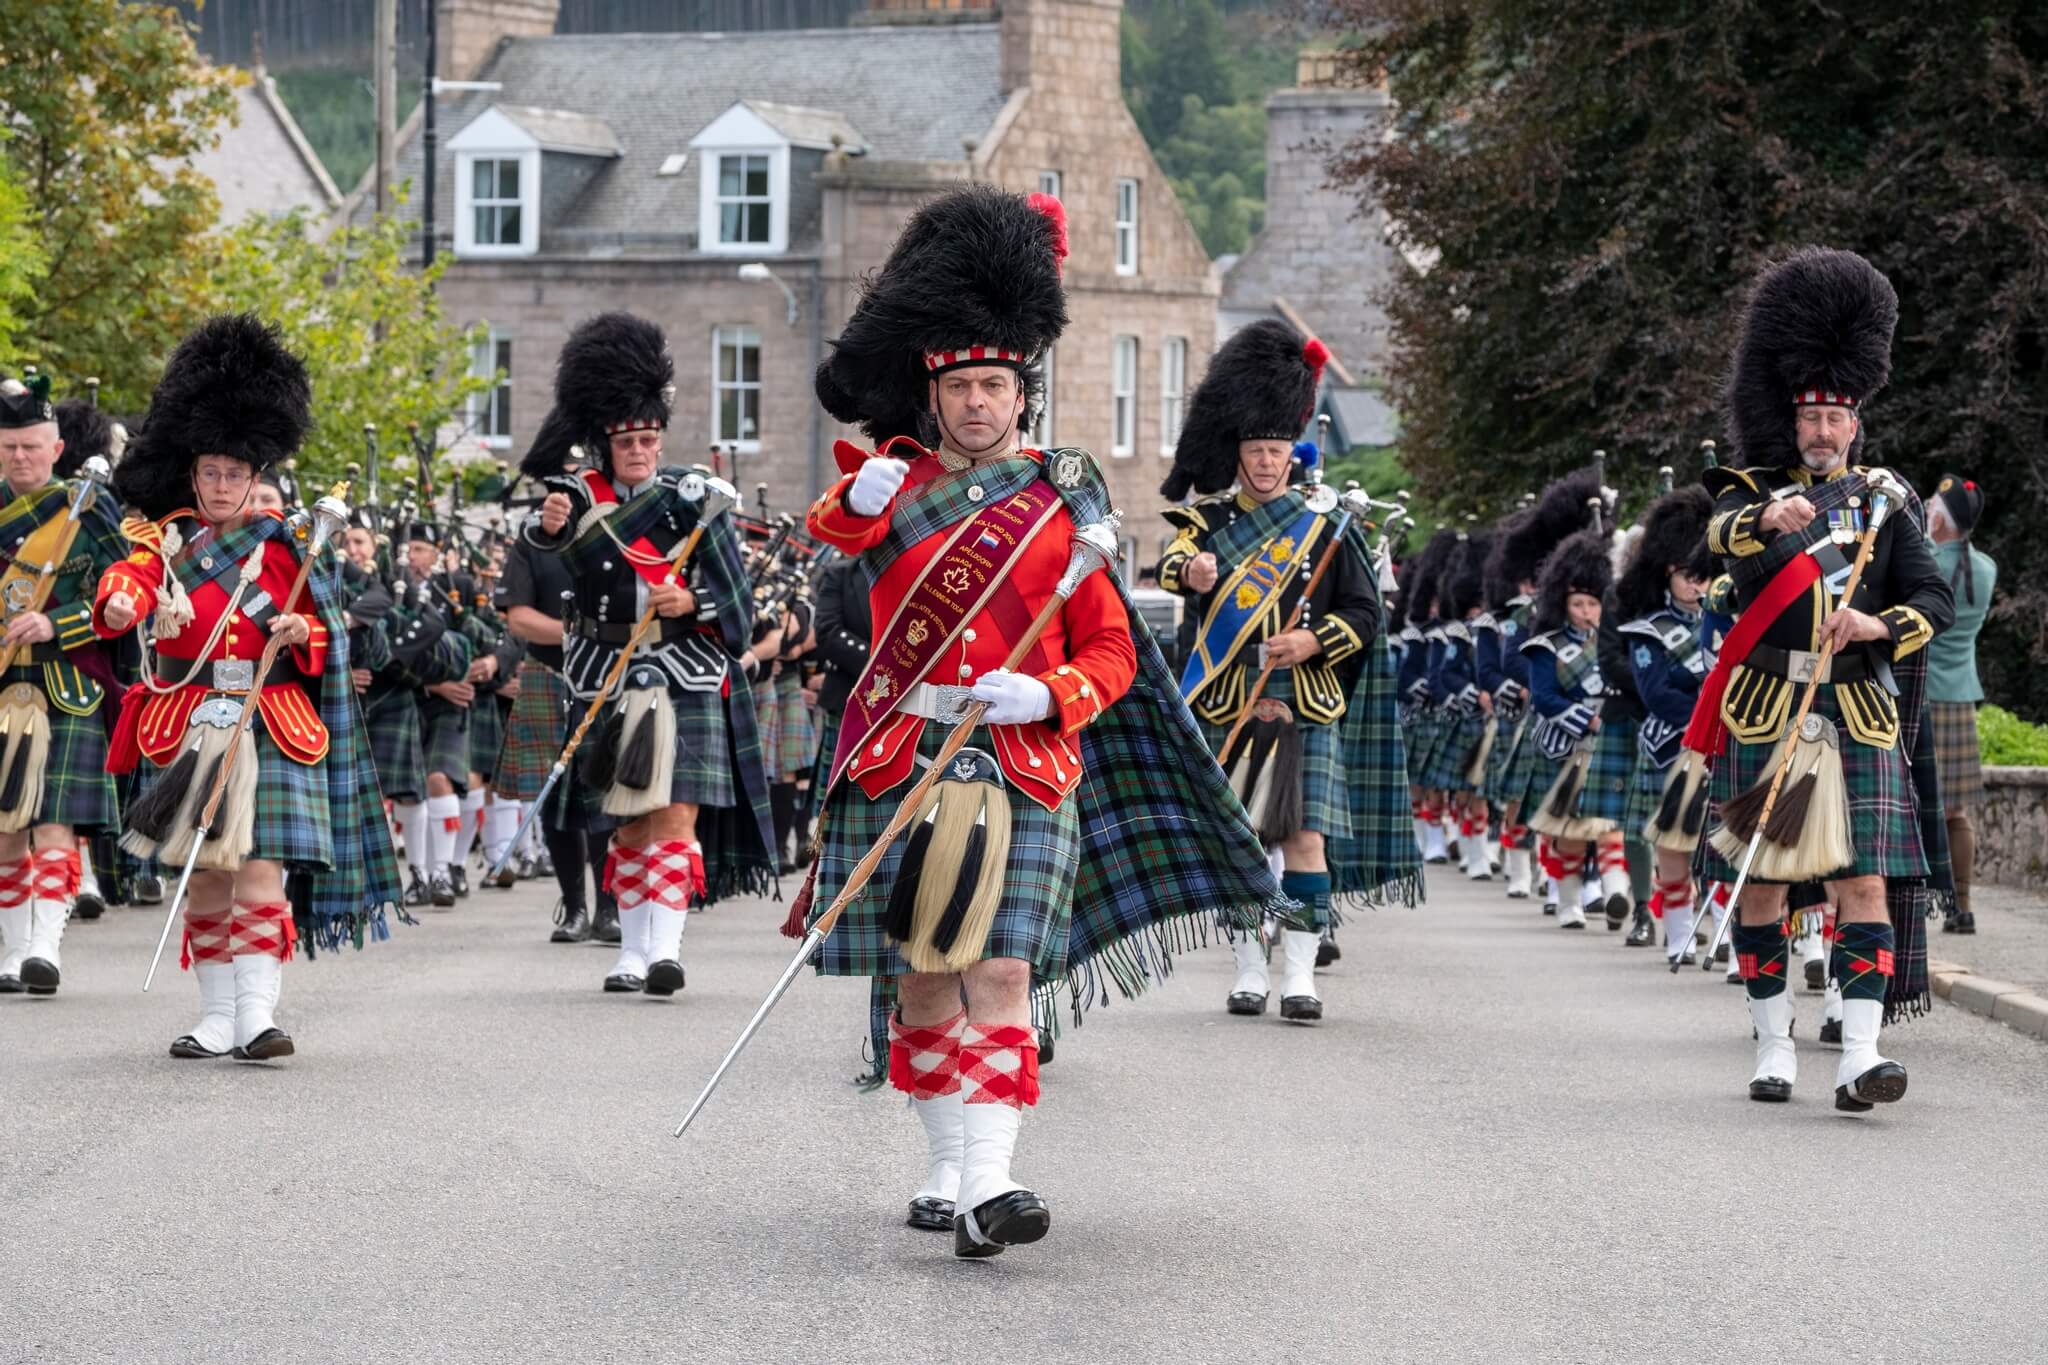 Pipe band marching at Ballater Highland Games